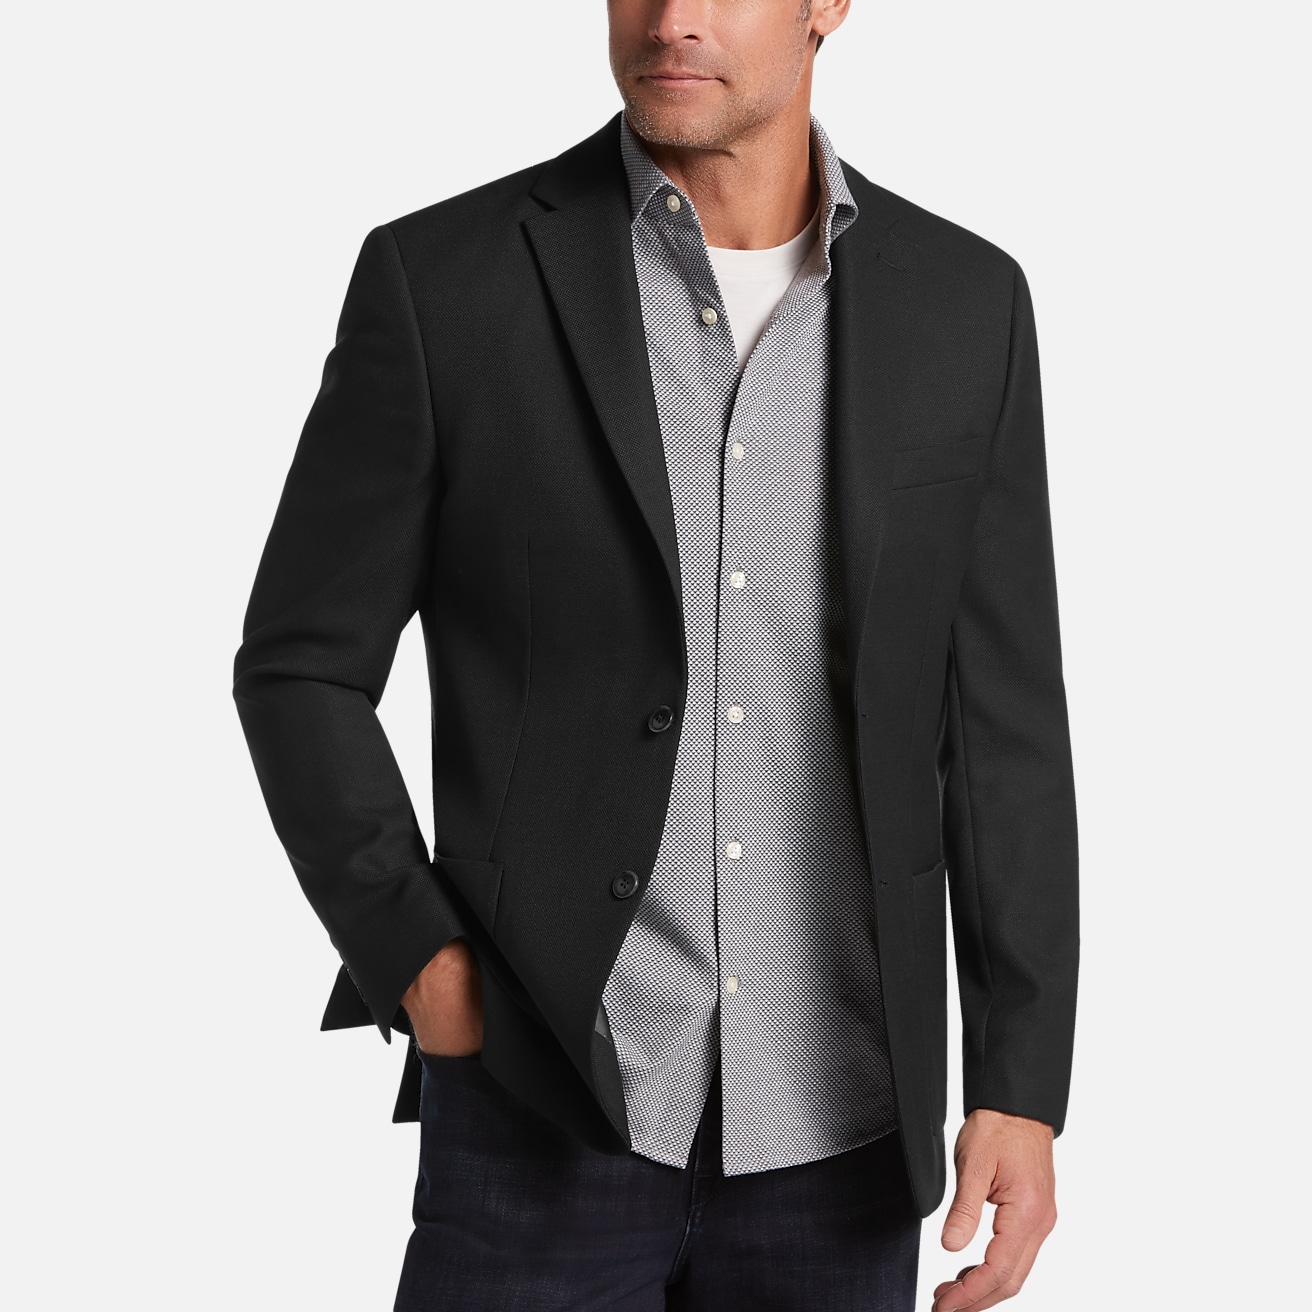 https://image.menswearhouse.com/is/image/TMW/TMW_158R_02_TOMMY_HILFIGER_SPORT_COATS_BLACK_MAIN?imPolicy=pdp-mob-2x